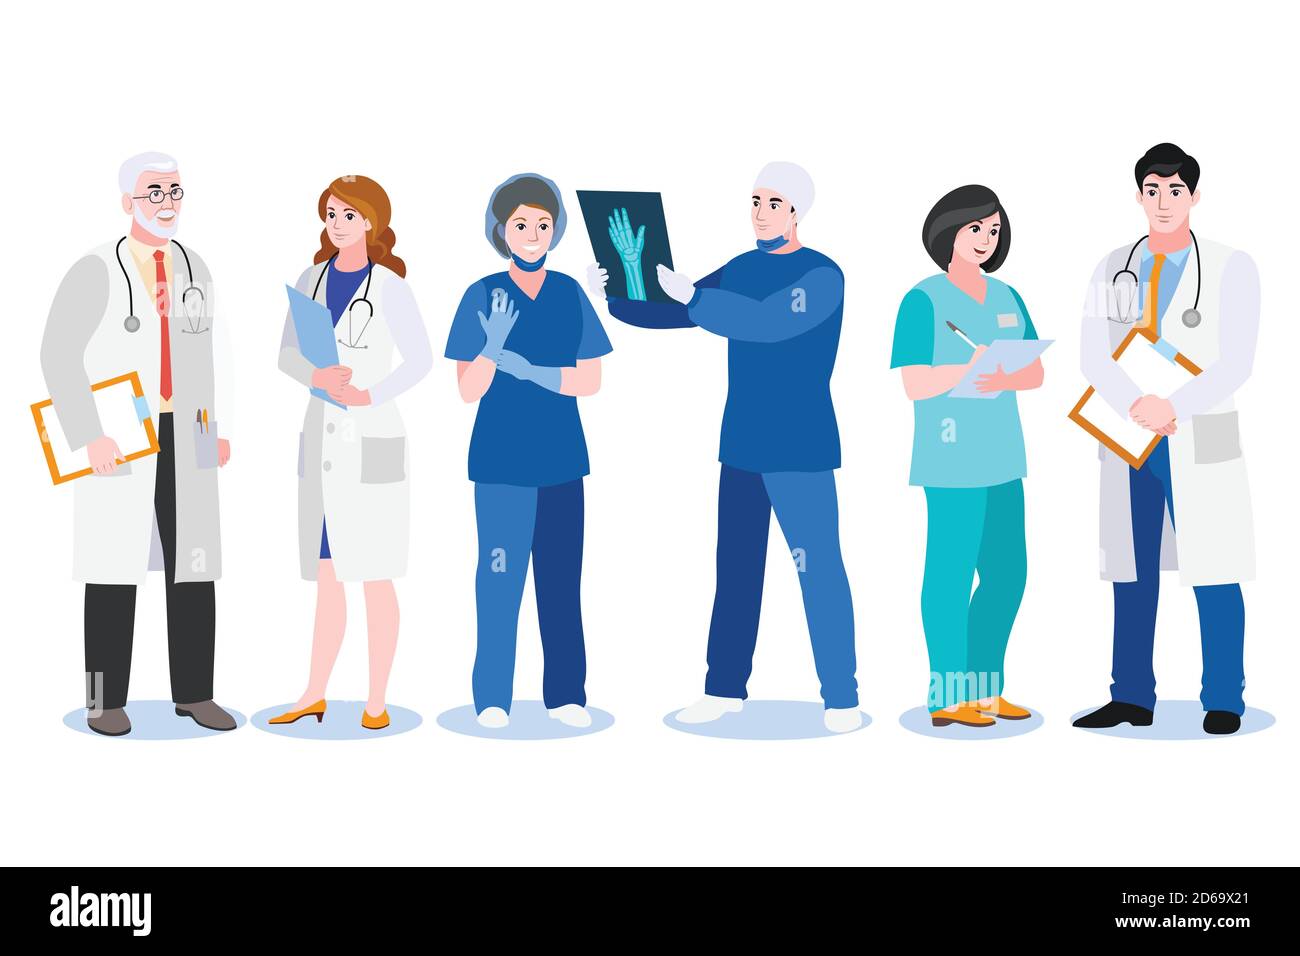 Men and women doctors, surgeon and nurse isolated on white background. Vector flat cartoon illustration. Medical team people characters set. Hospital Stock Vector